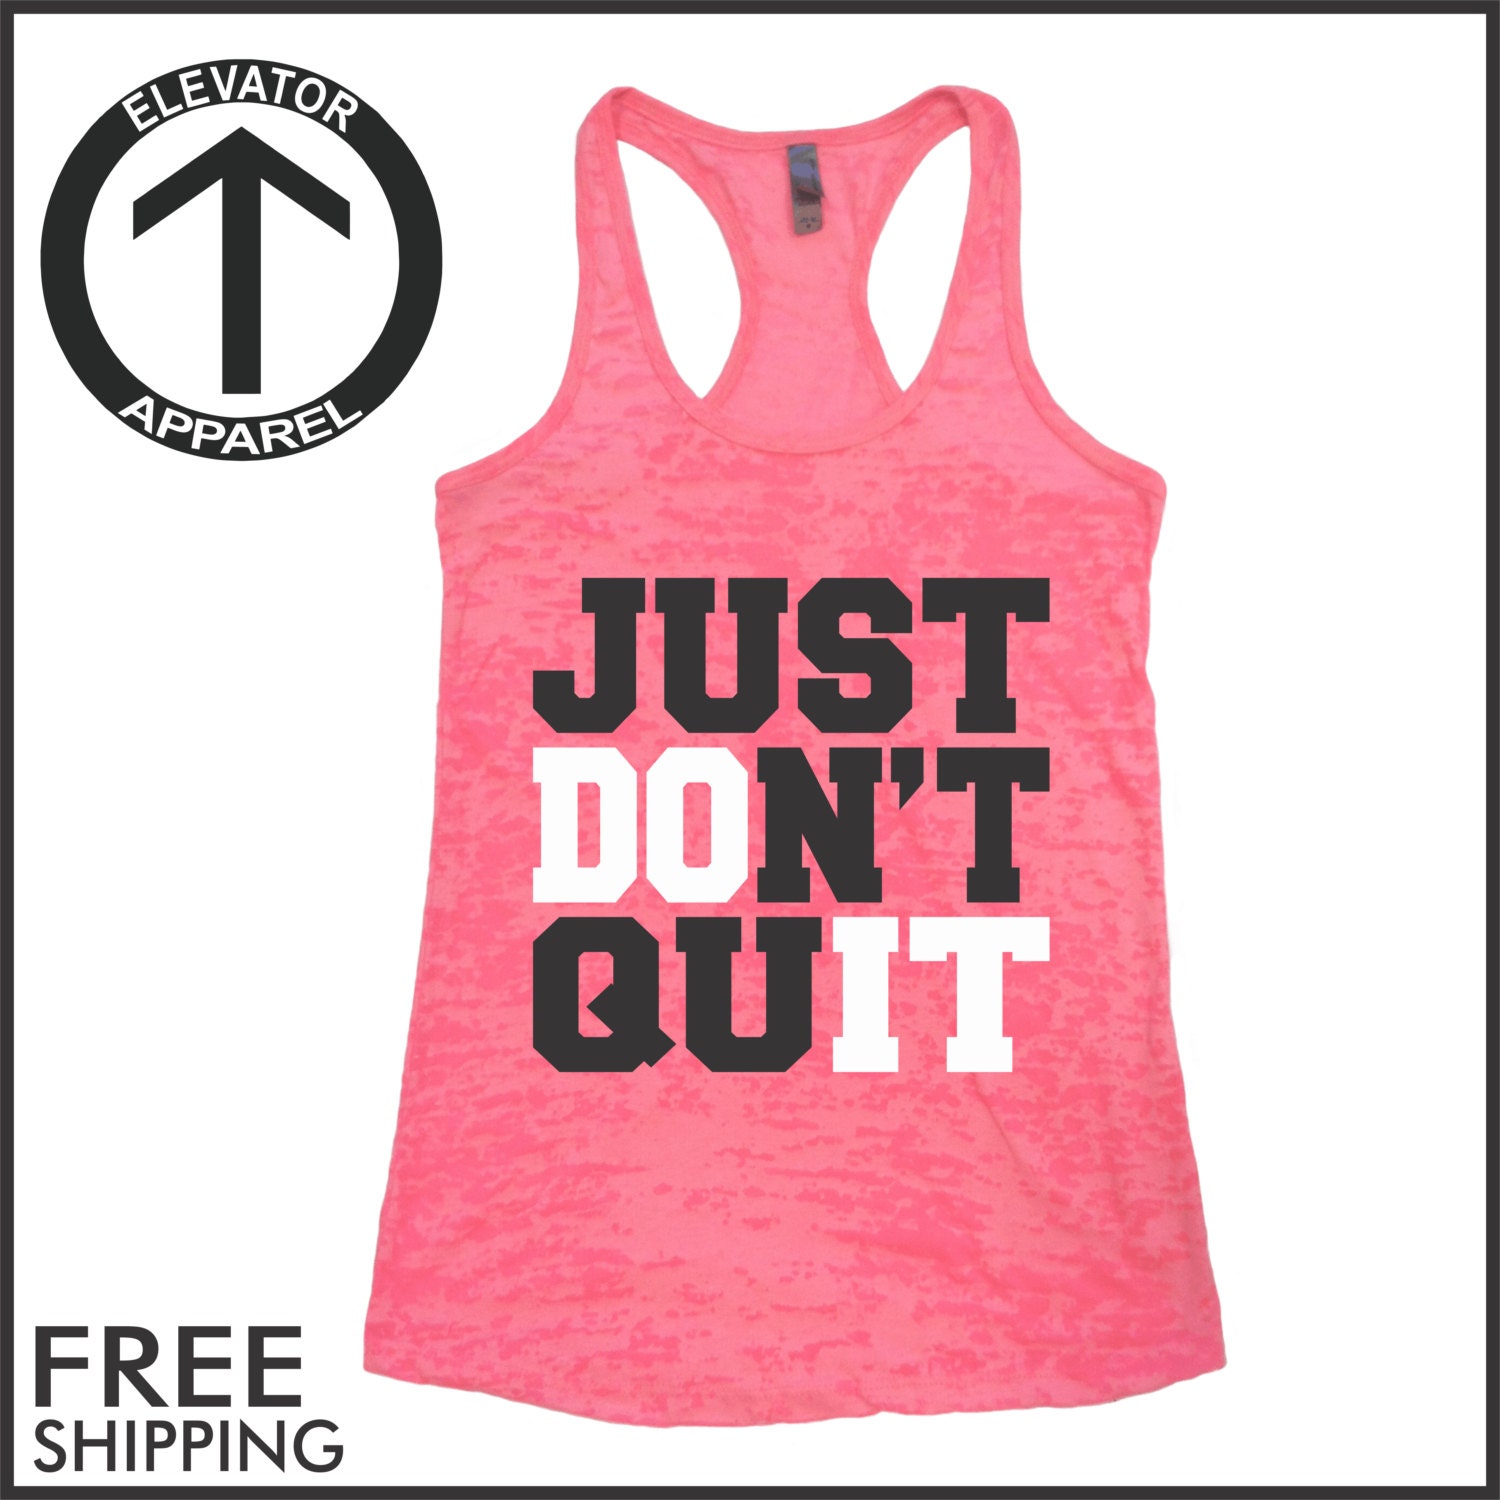 Just Don't Quit. Burnout Tank Top. Workout Tank by ElevatorApparel